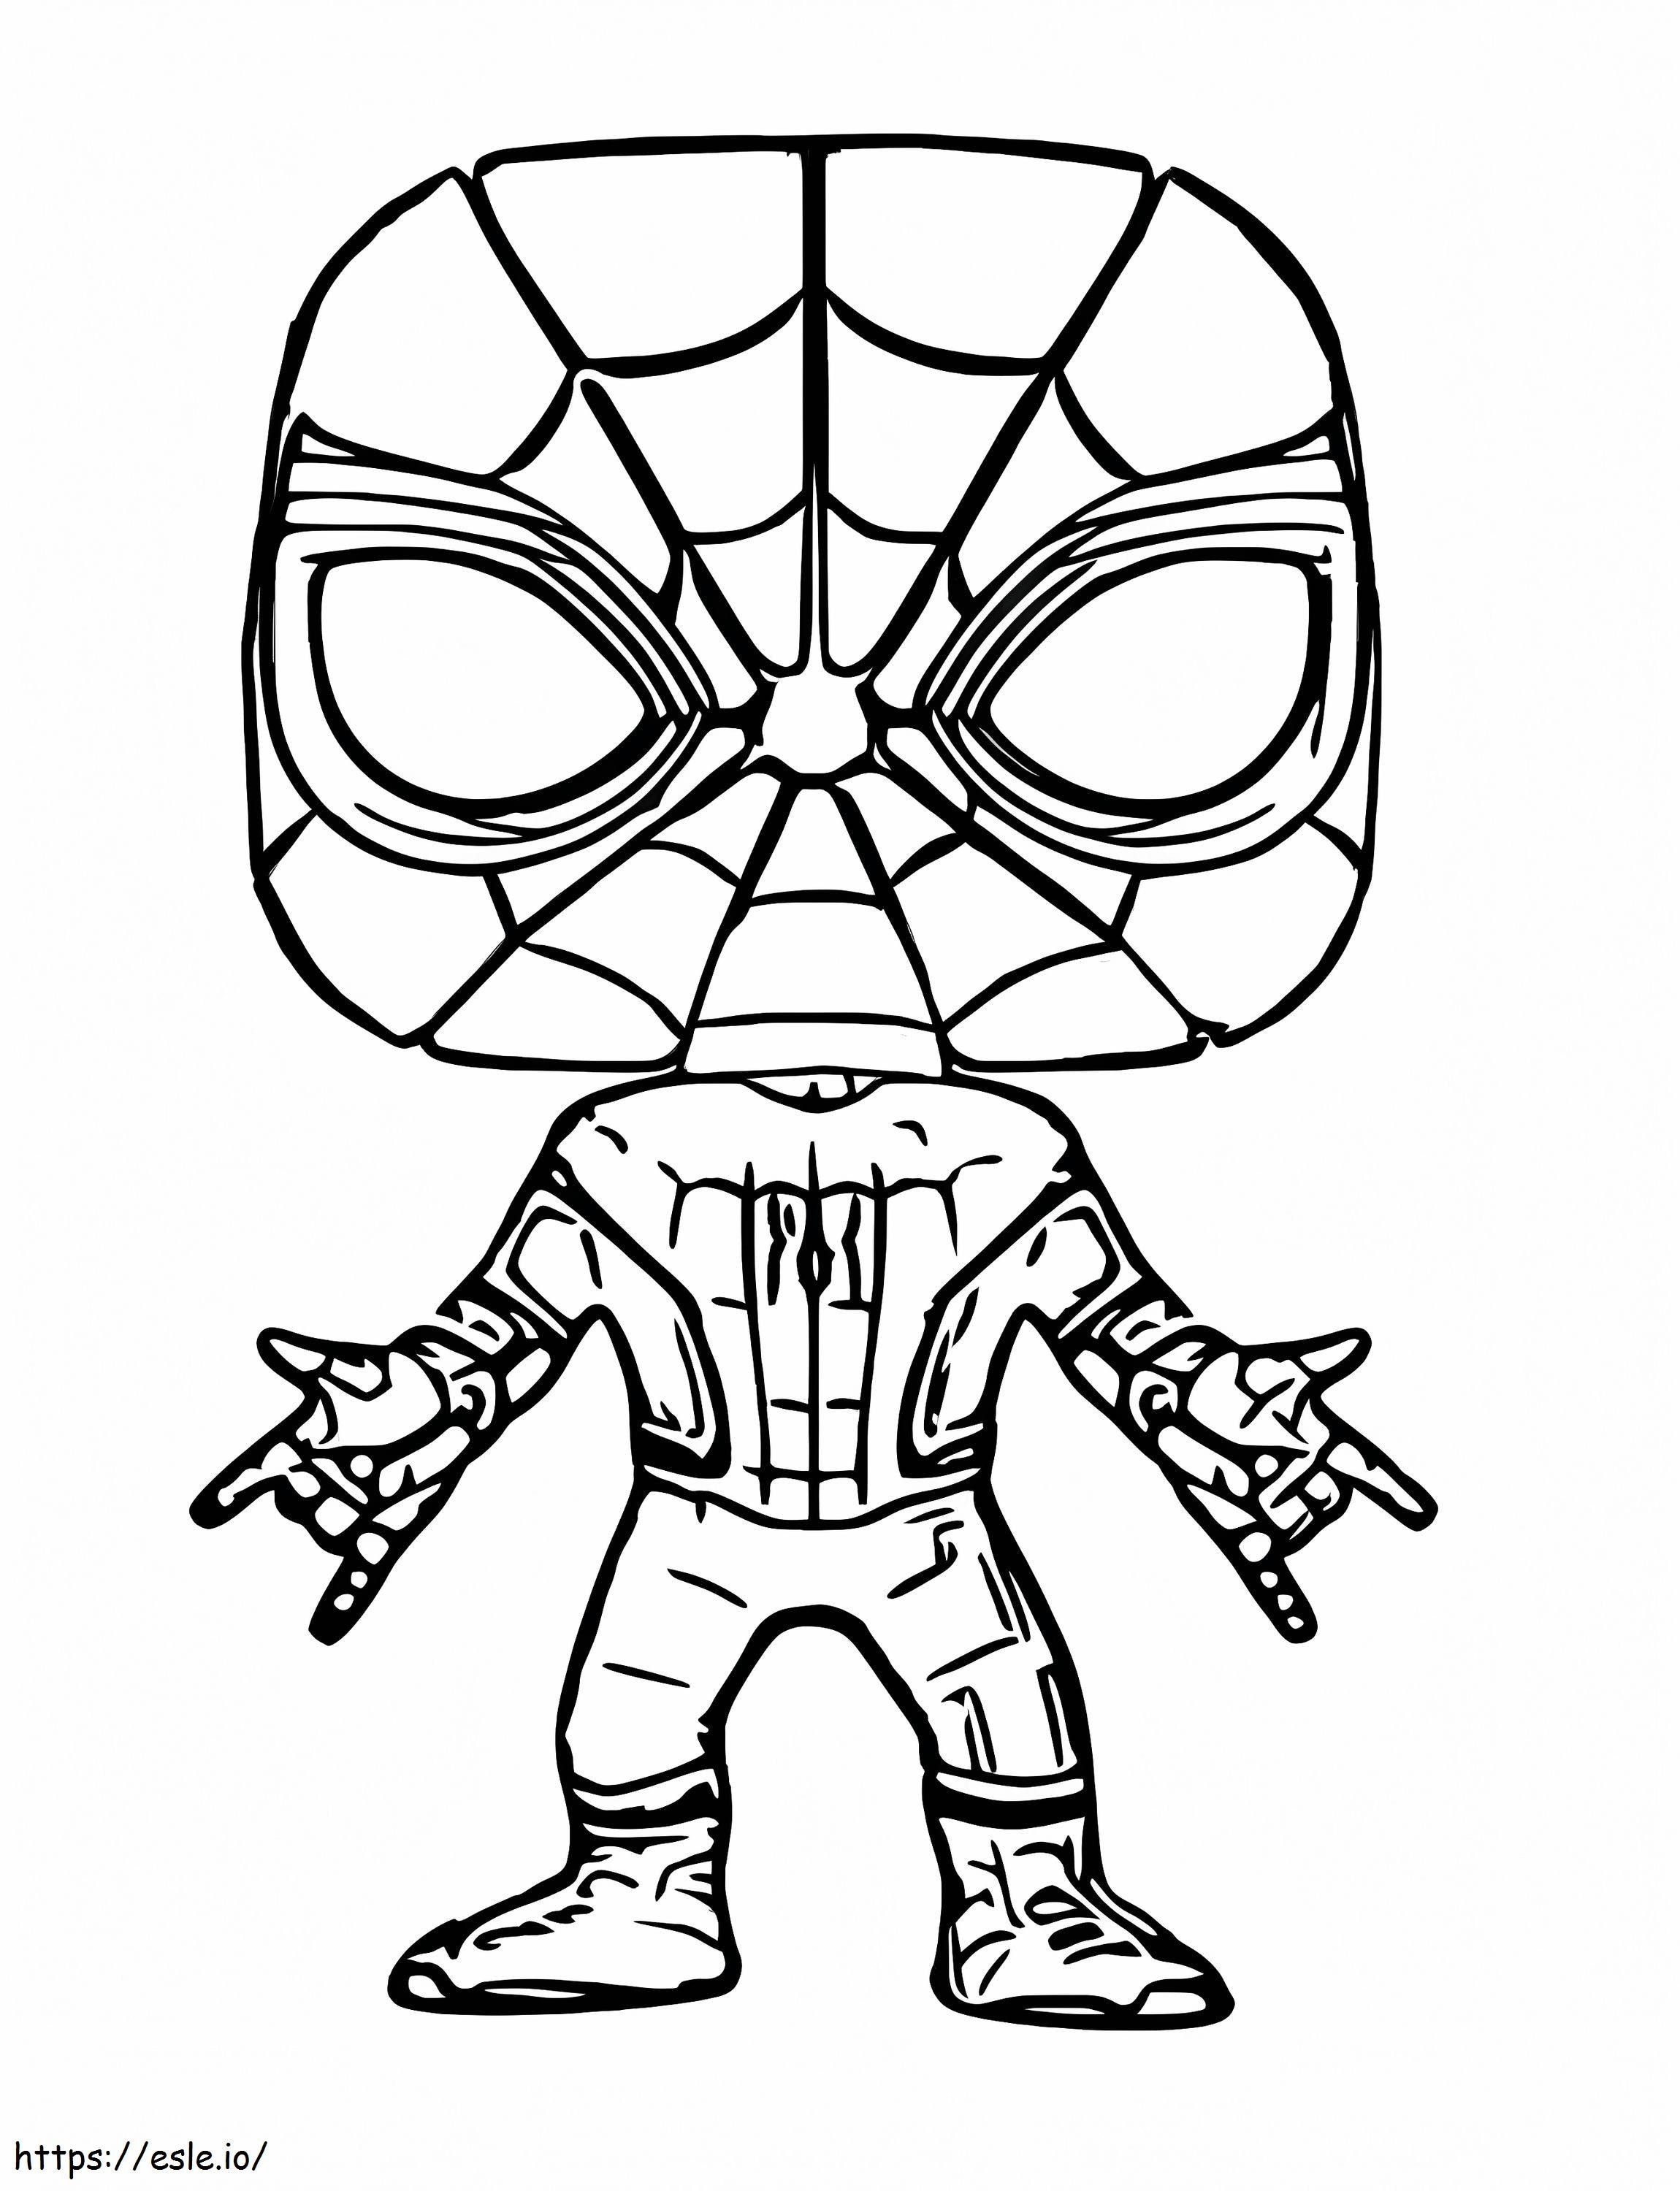 Funko Spider Man coloring page